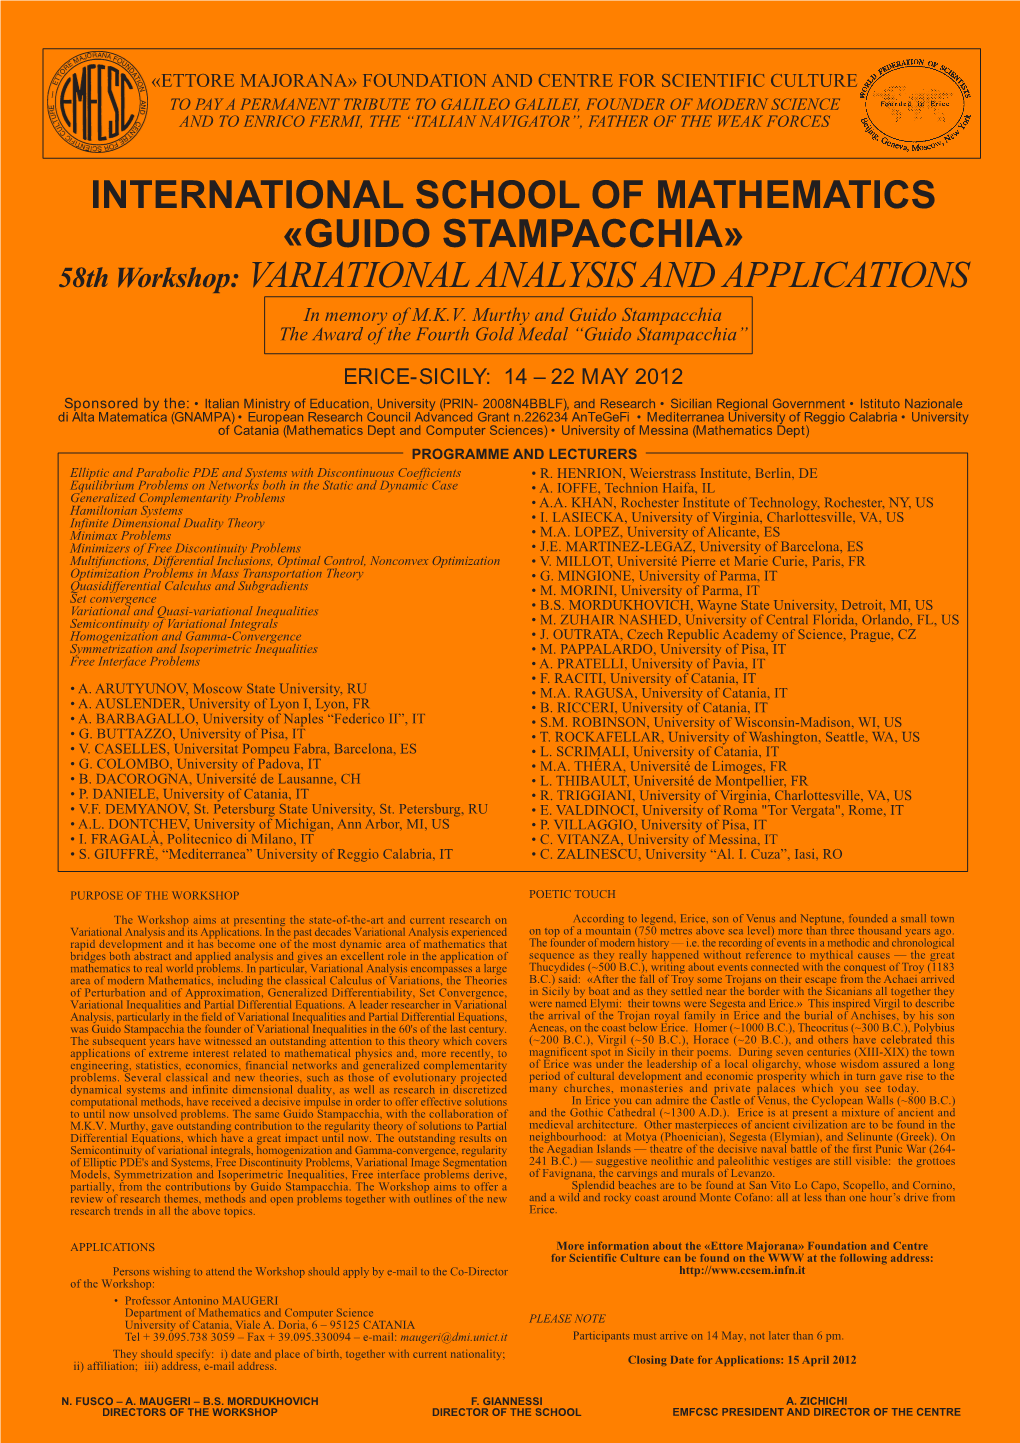 GUIDO STAMPACCHIAÈ 58Th Workshop: VARIATIONAL ANALYSIS and APPLICATIONS in Memory of M.K.V